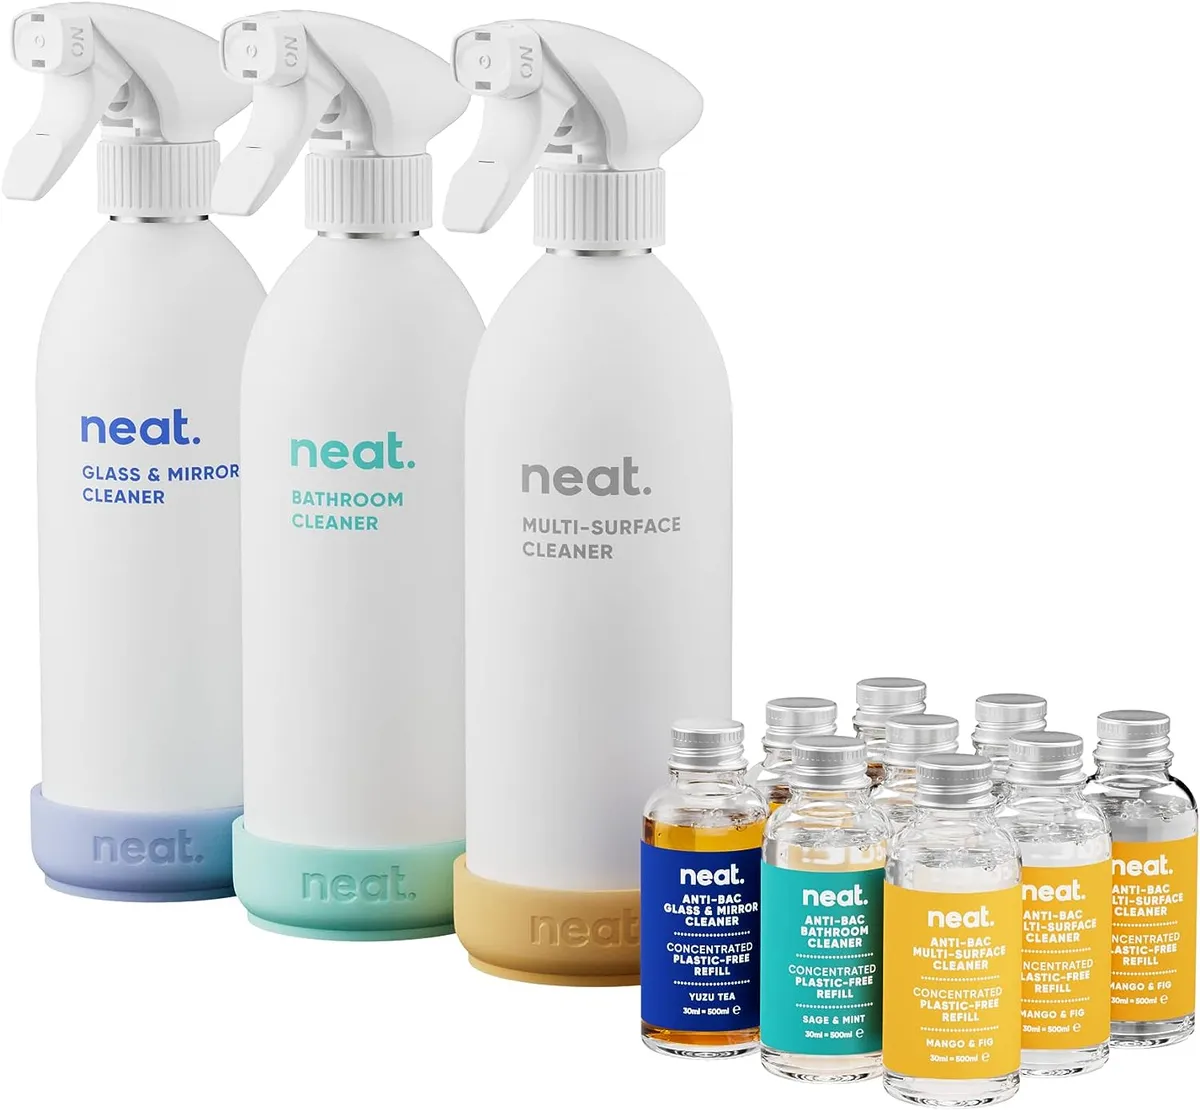 Neat cleaning bundle